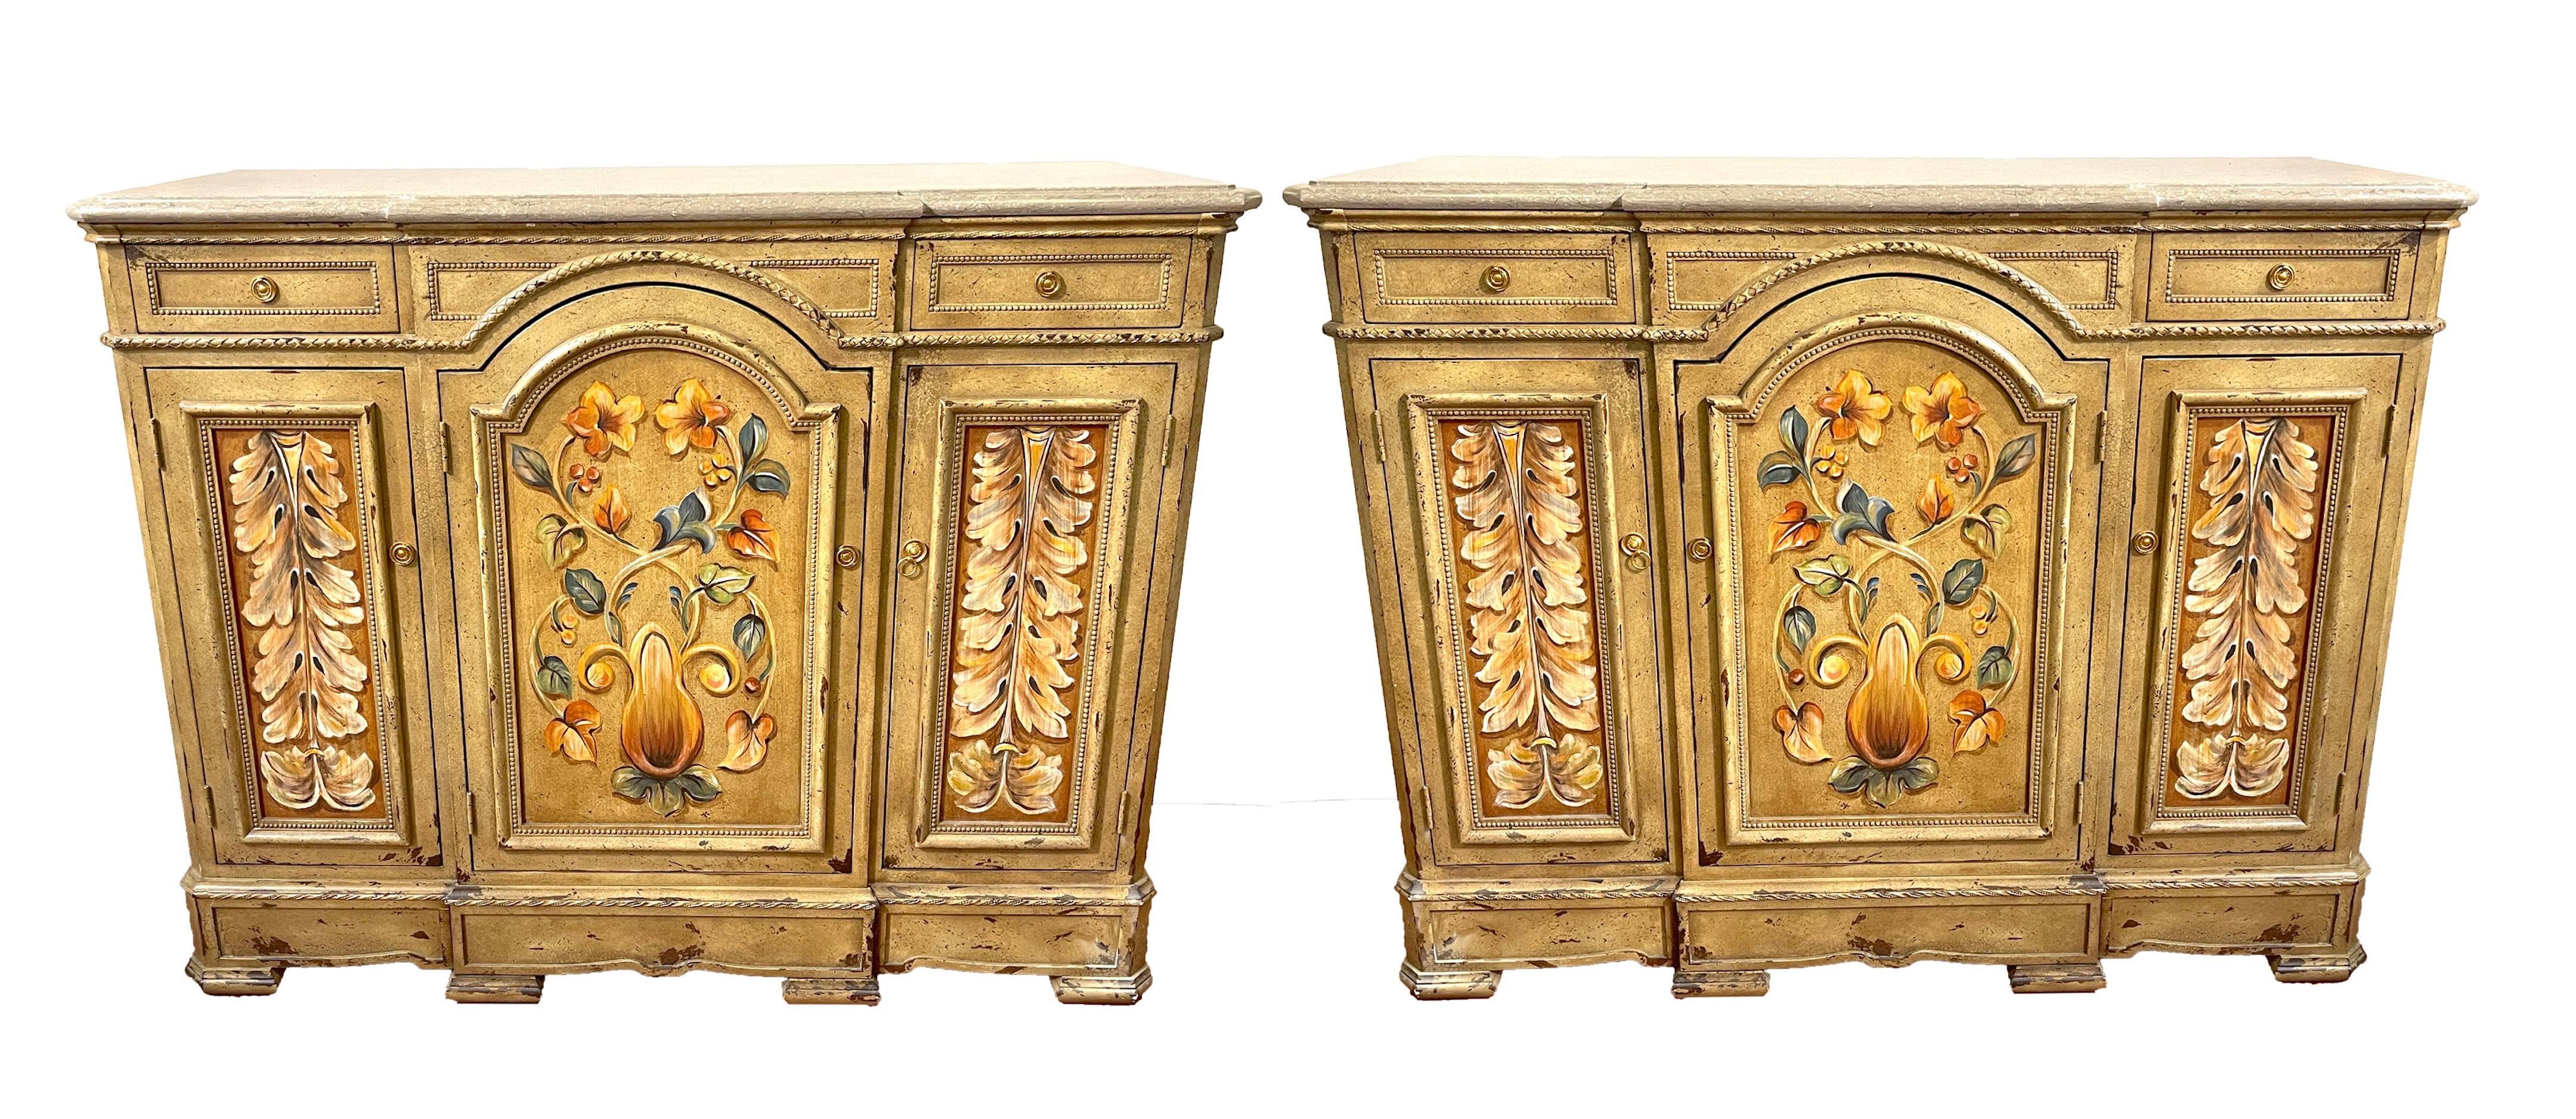 Pair of Tuscan Painted & Marble Top Credenzas by Susan Kaiser for Hickory Chair
Limited production pieces, Susan Kaiser for Hickory Chair,

A rare and elegant pair of Tuscan painted & marble top credenzas, designed by Susan Kaiser for Hickory Chair